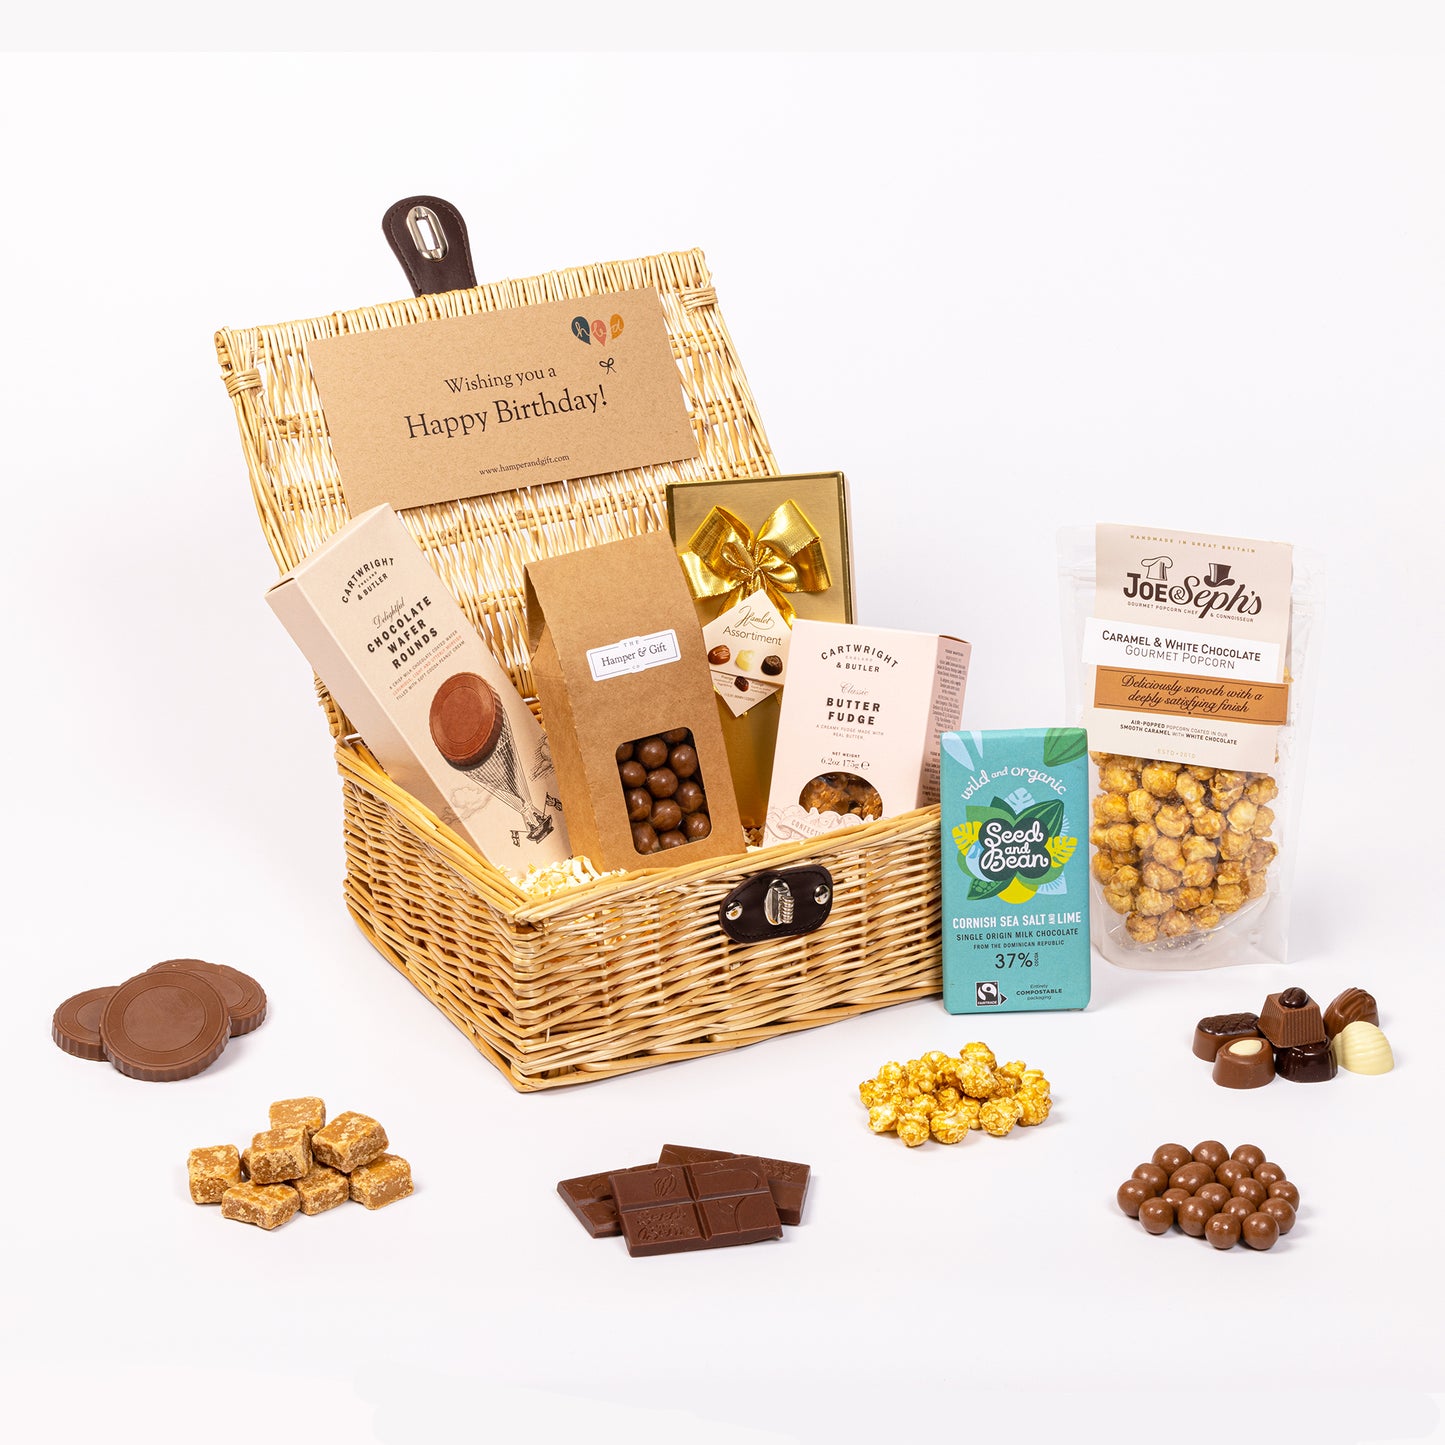 Happy Birthday Chocolate & Fudge Hamper filled with a variety of chocolate, fudge, biscuit and gourmet popcorn